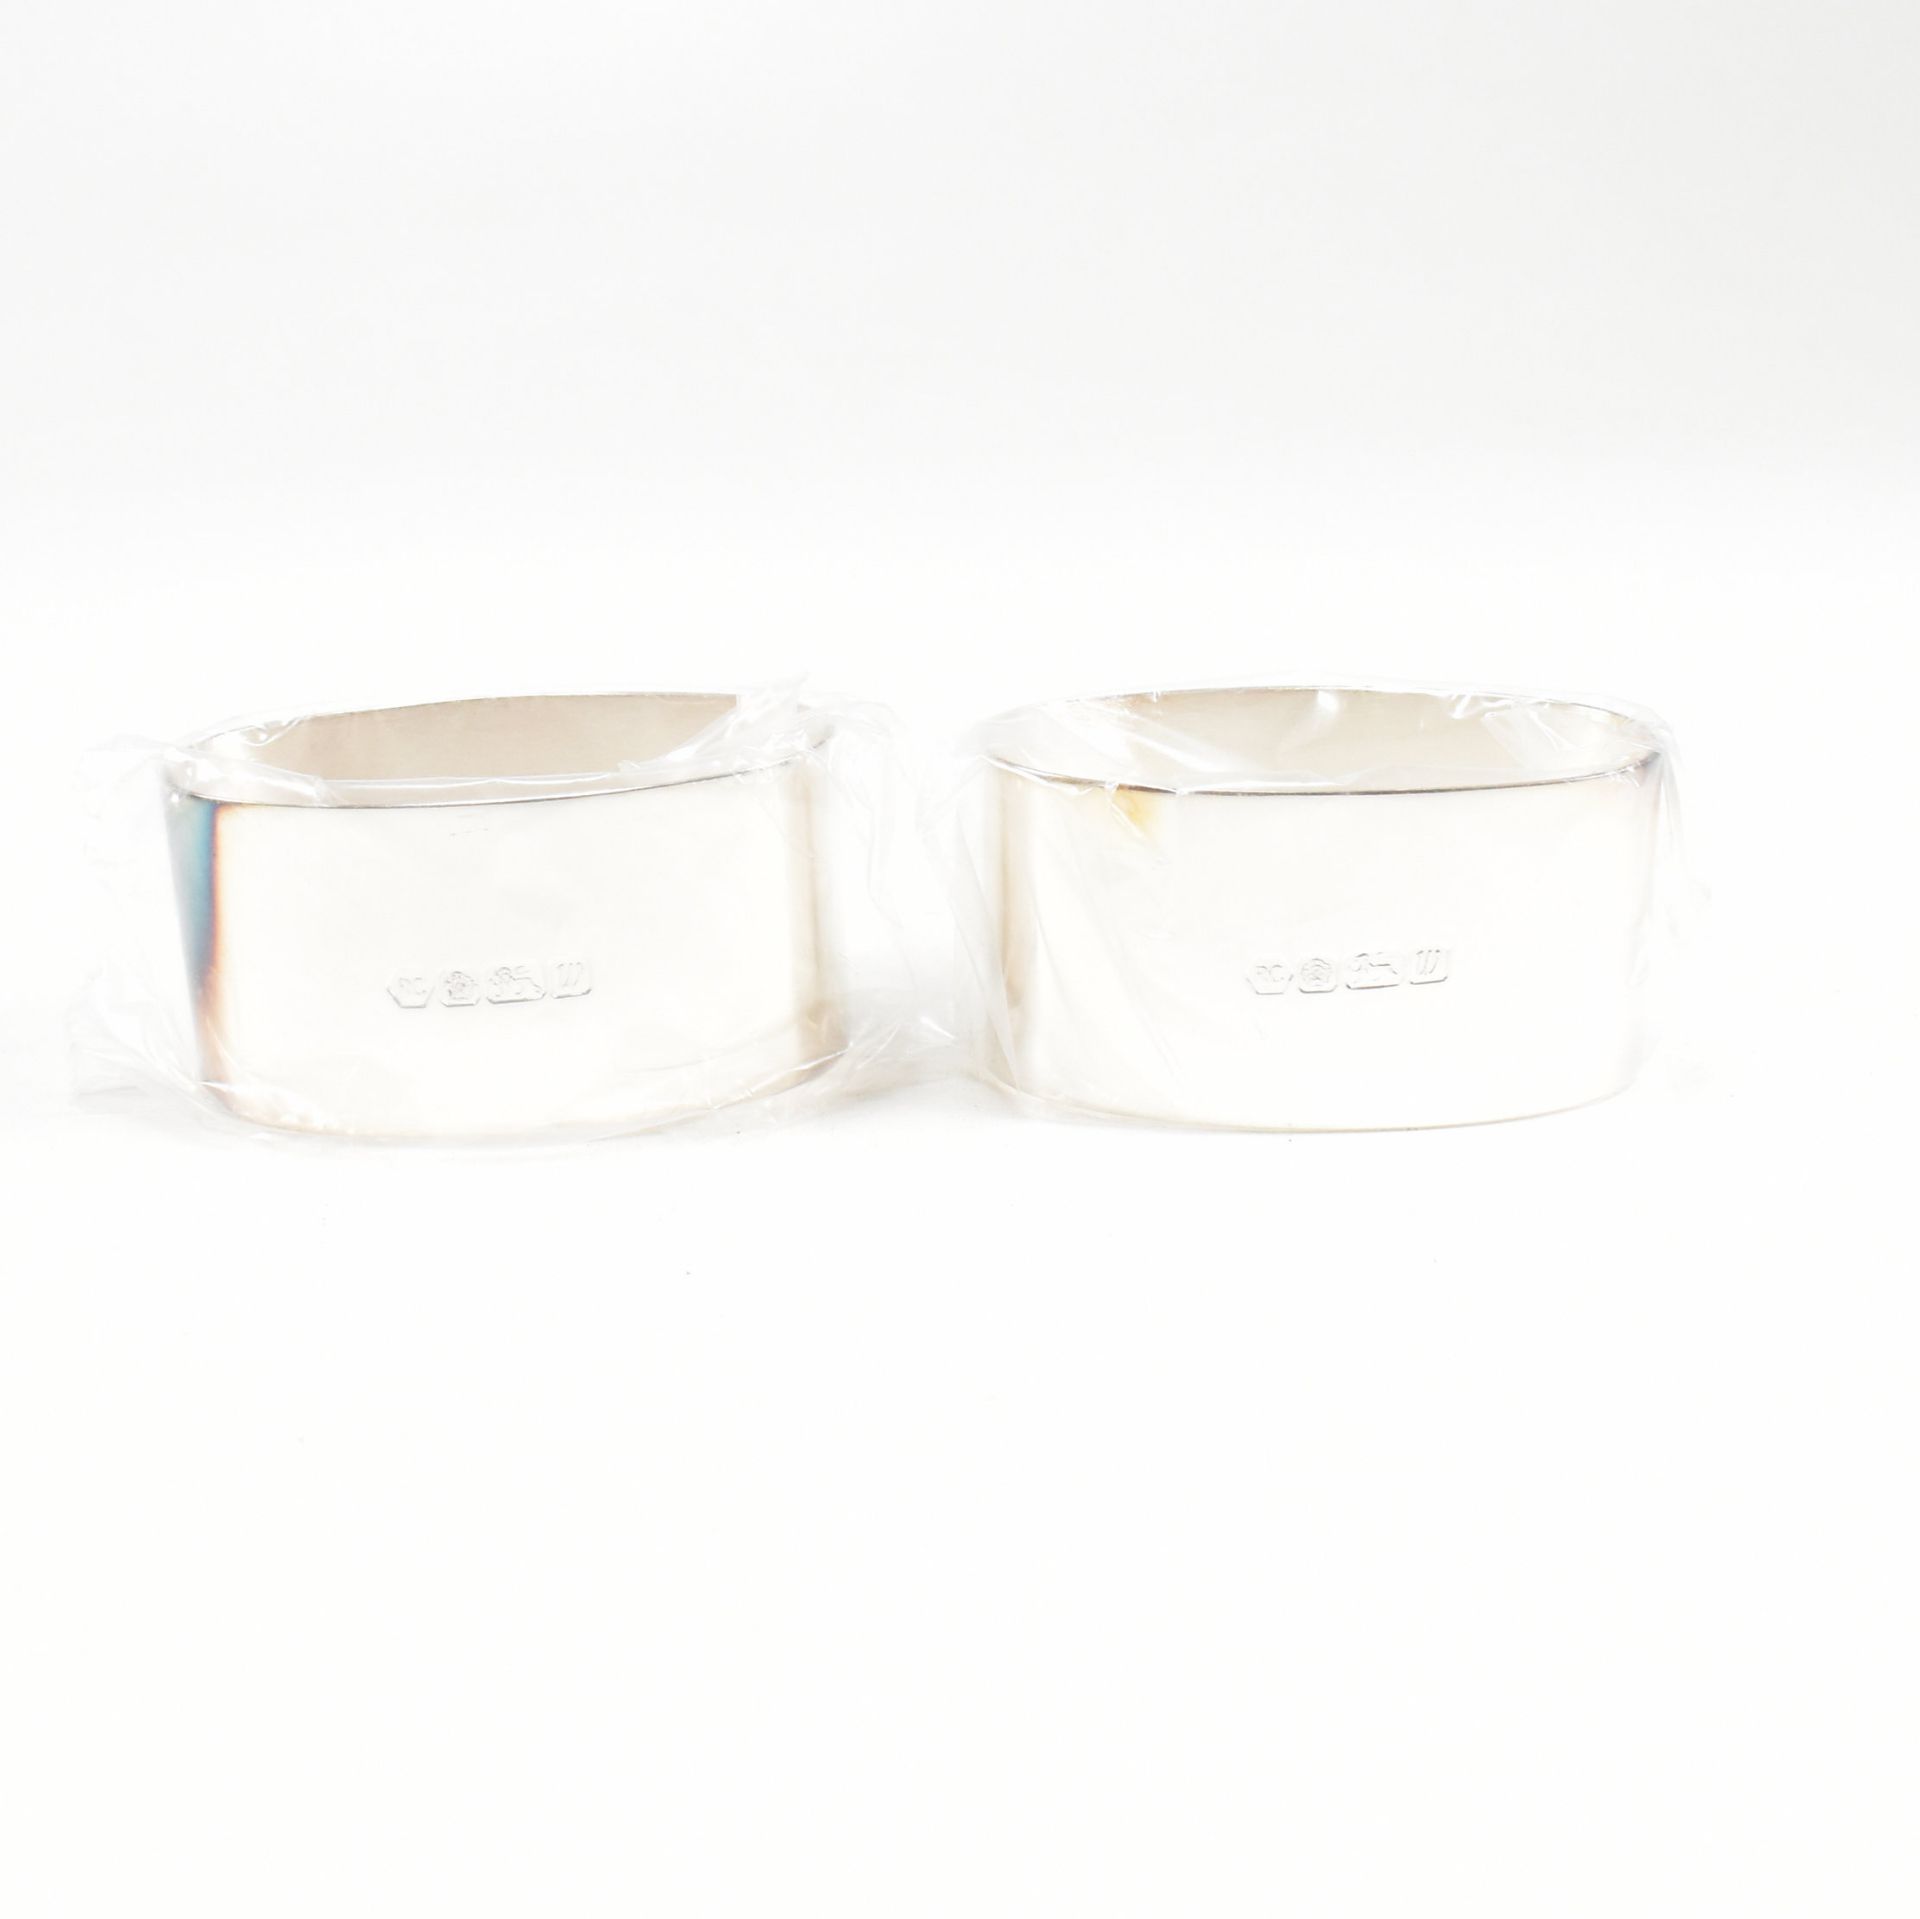 1990S CASED PAIR OF NAPKIN RINGS - Image 7 of 11